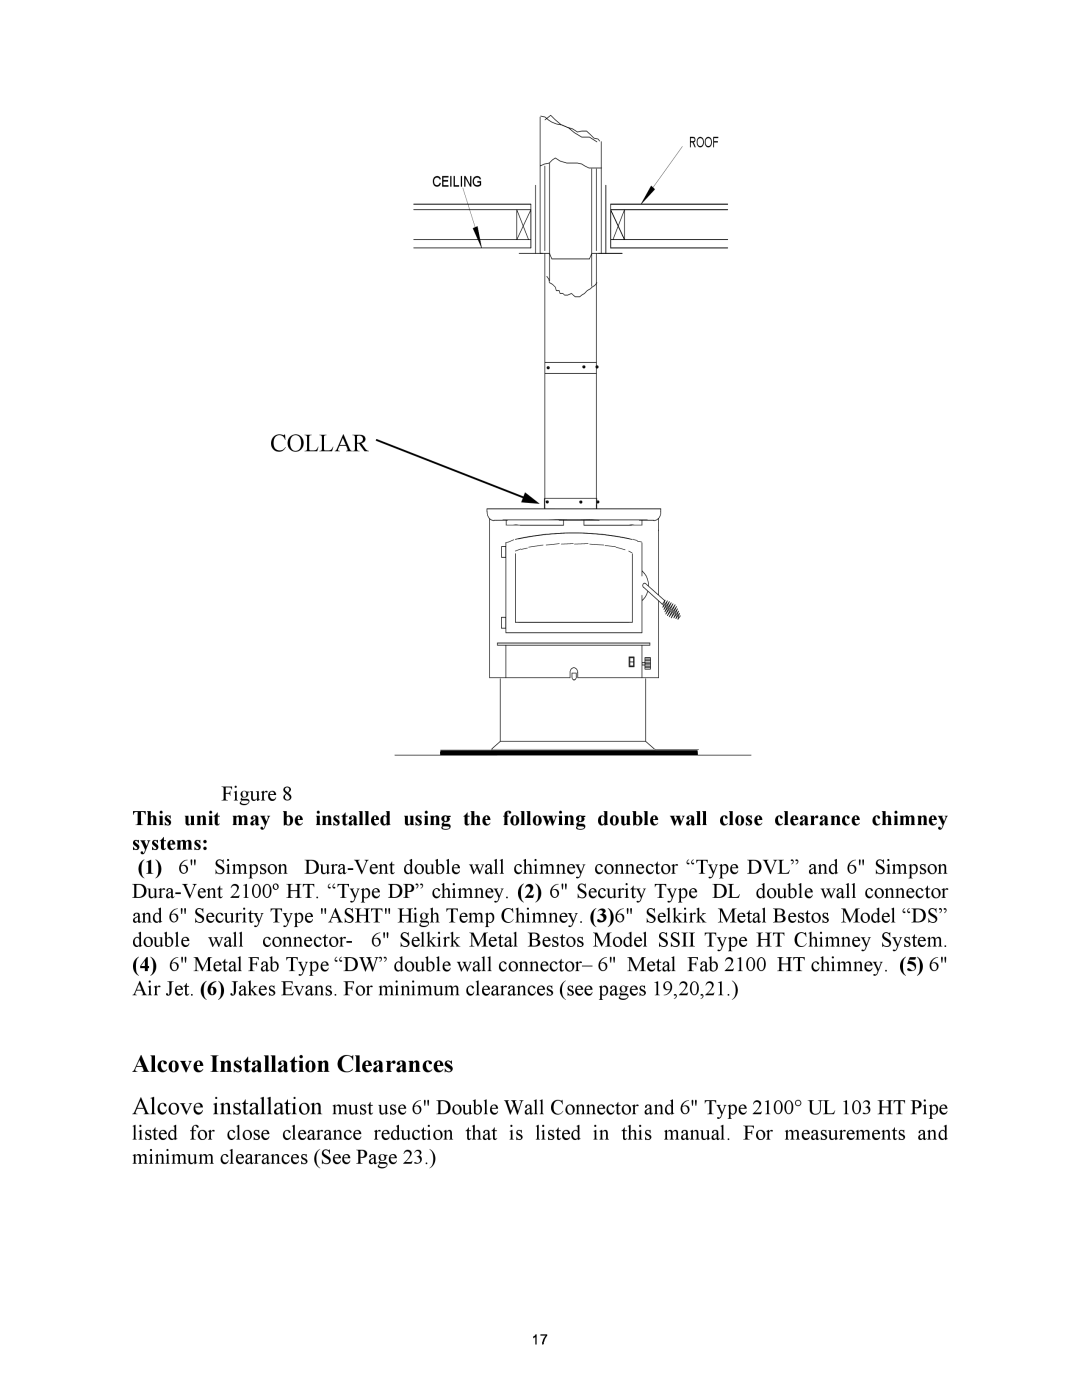 New Buck Corporation 74 installation instructions Collar, Alcove Installation Clearances 